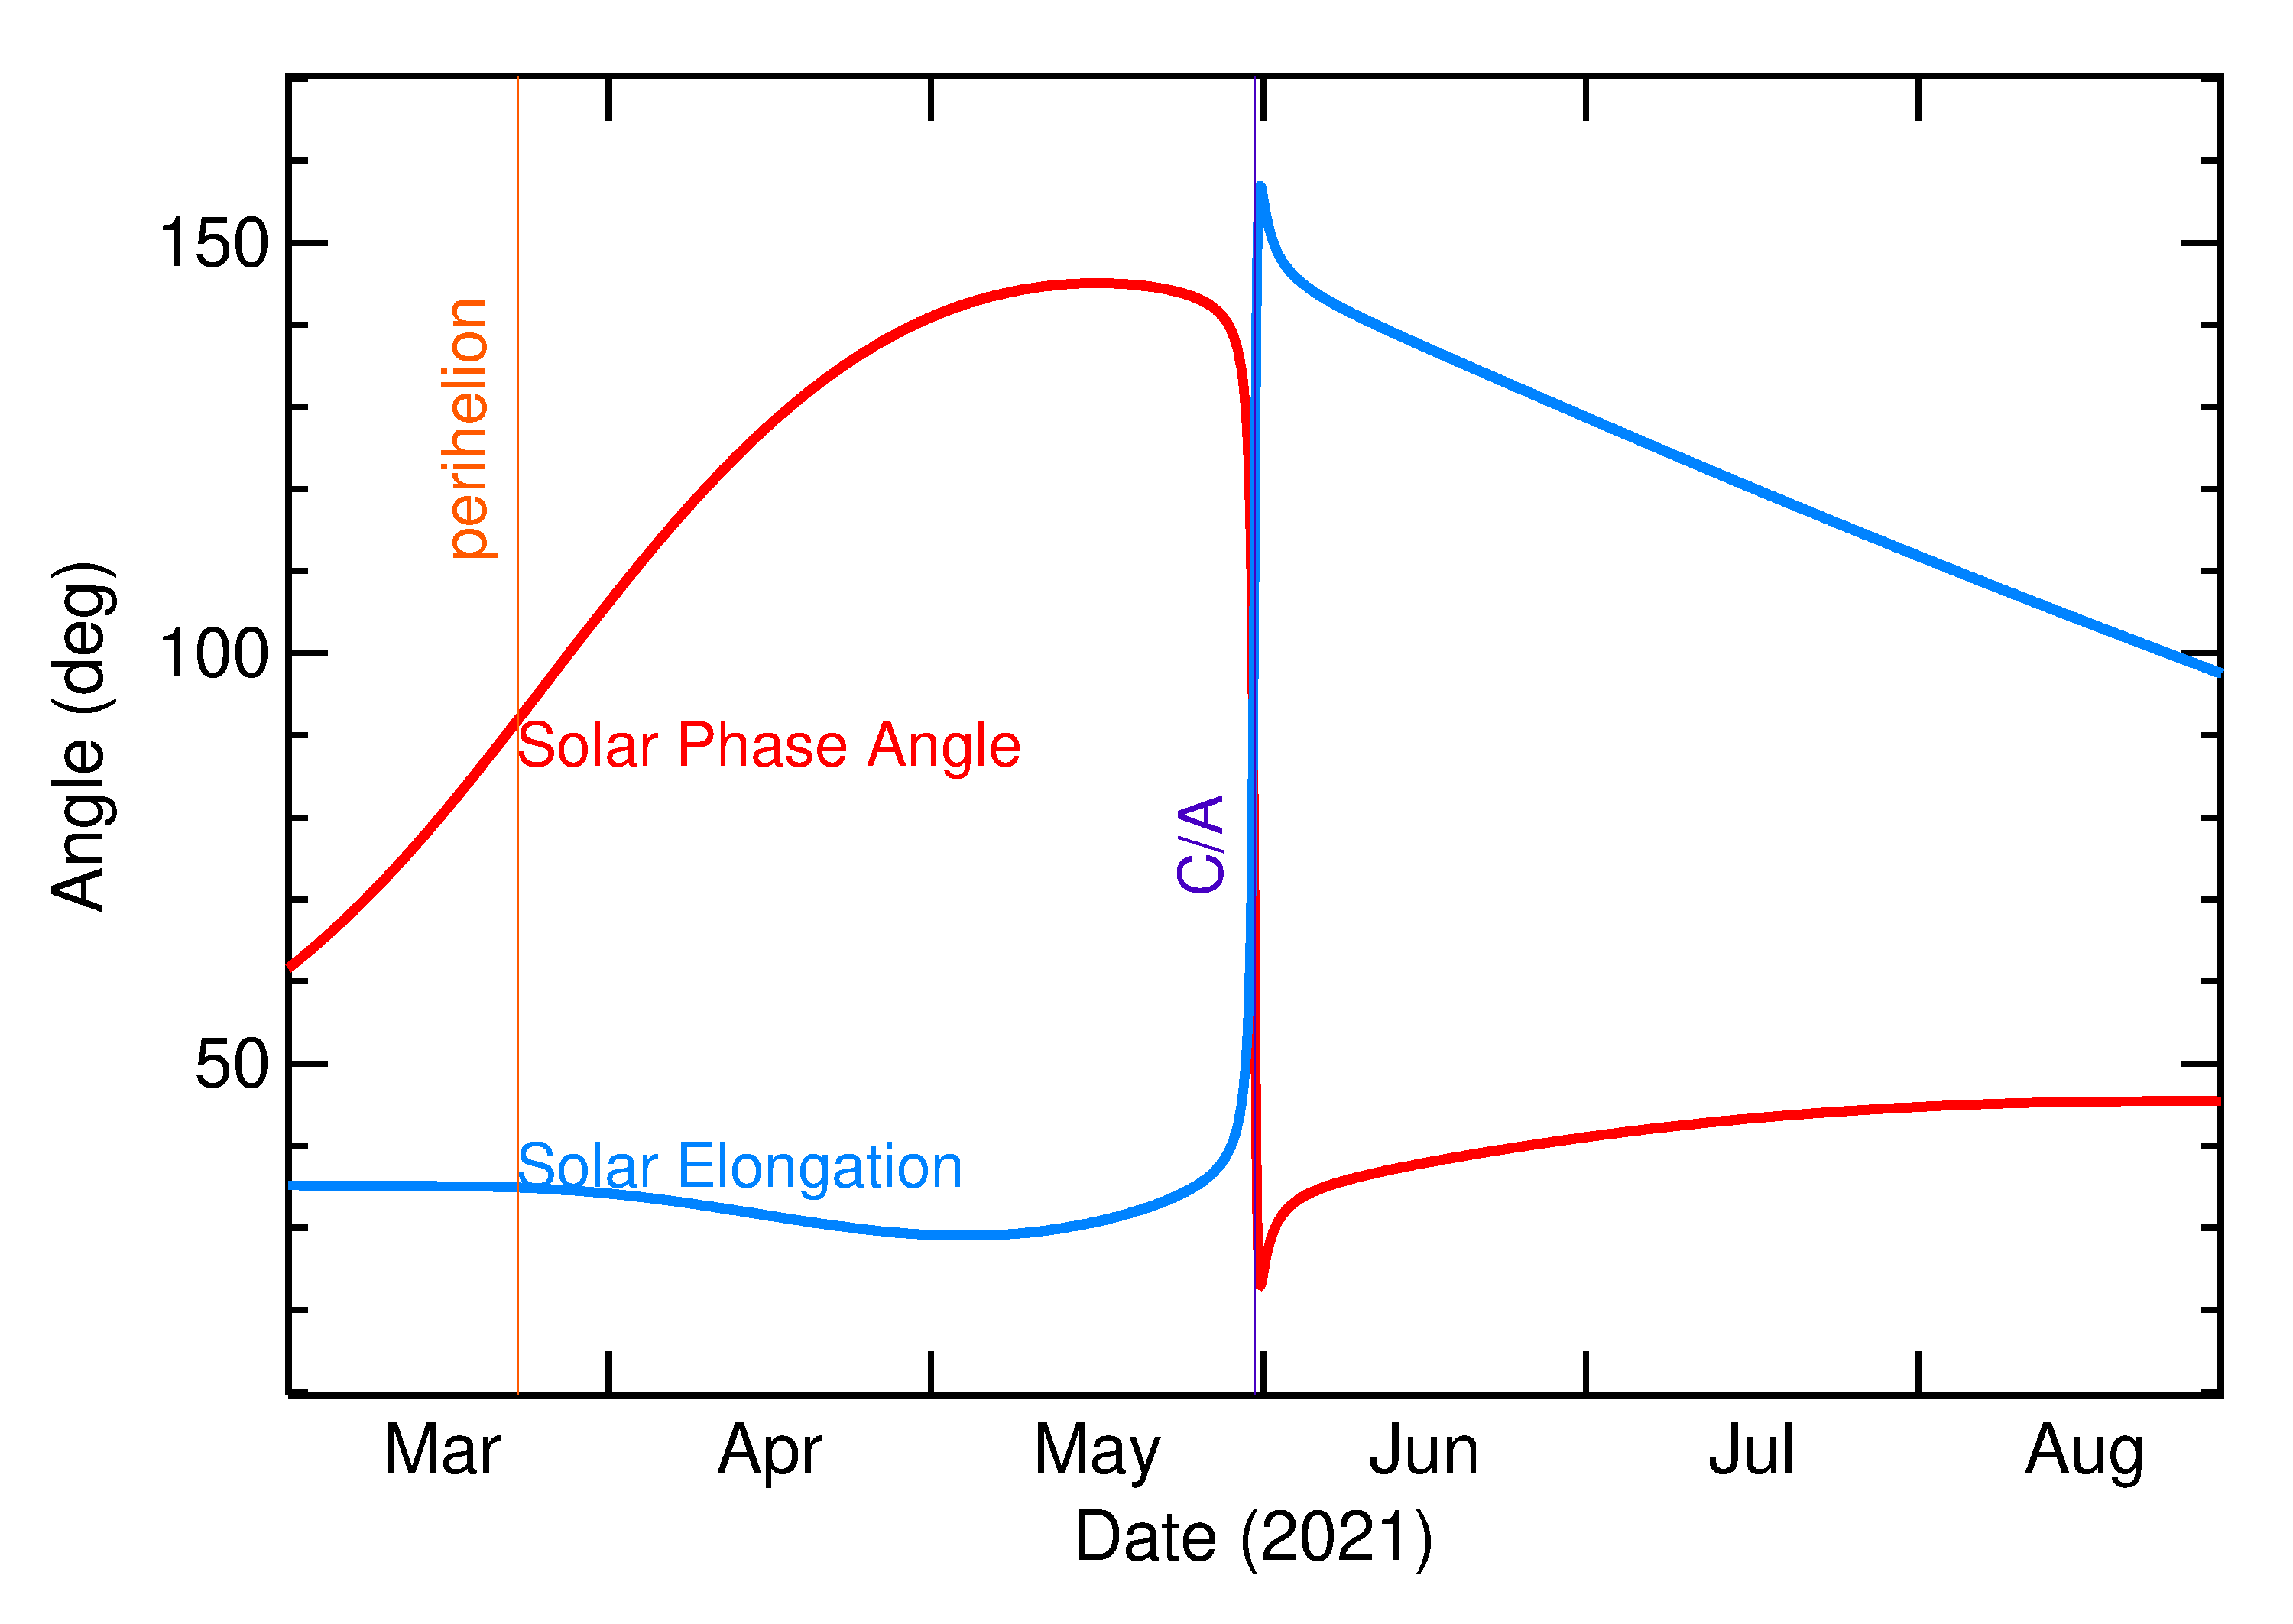 Solar Elongation and Solar Phase Angle of 2021 KO2 in the months around closest approach